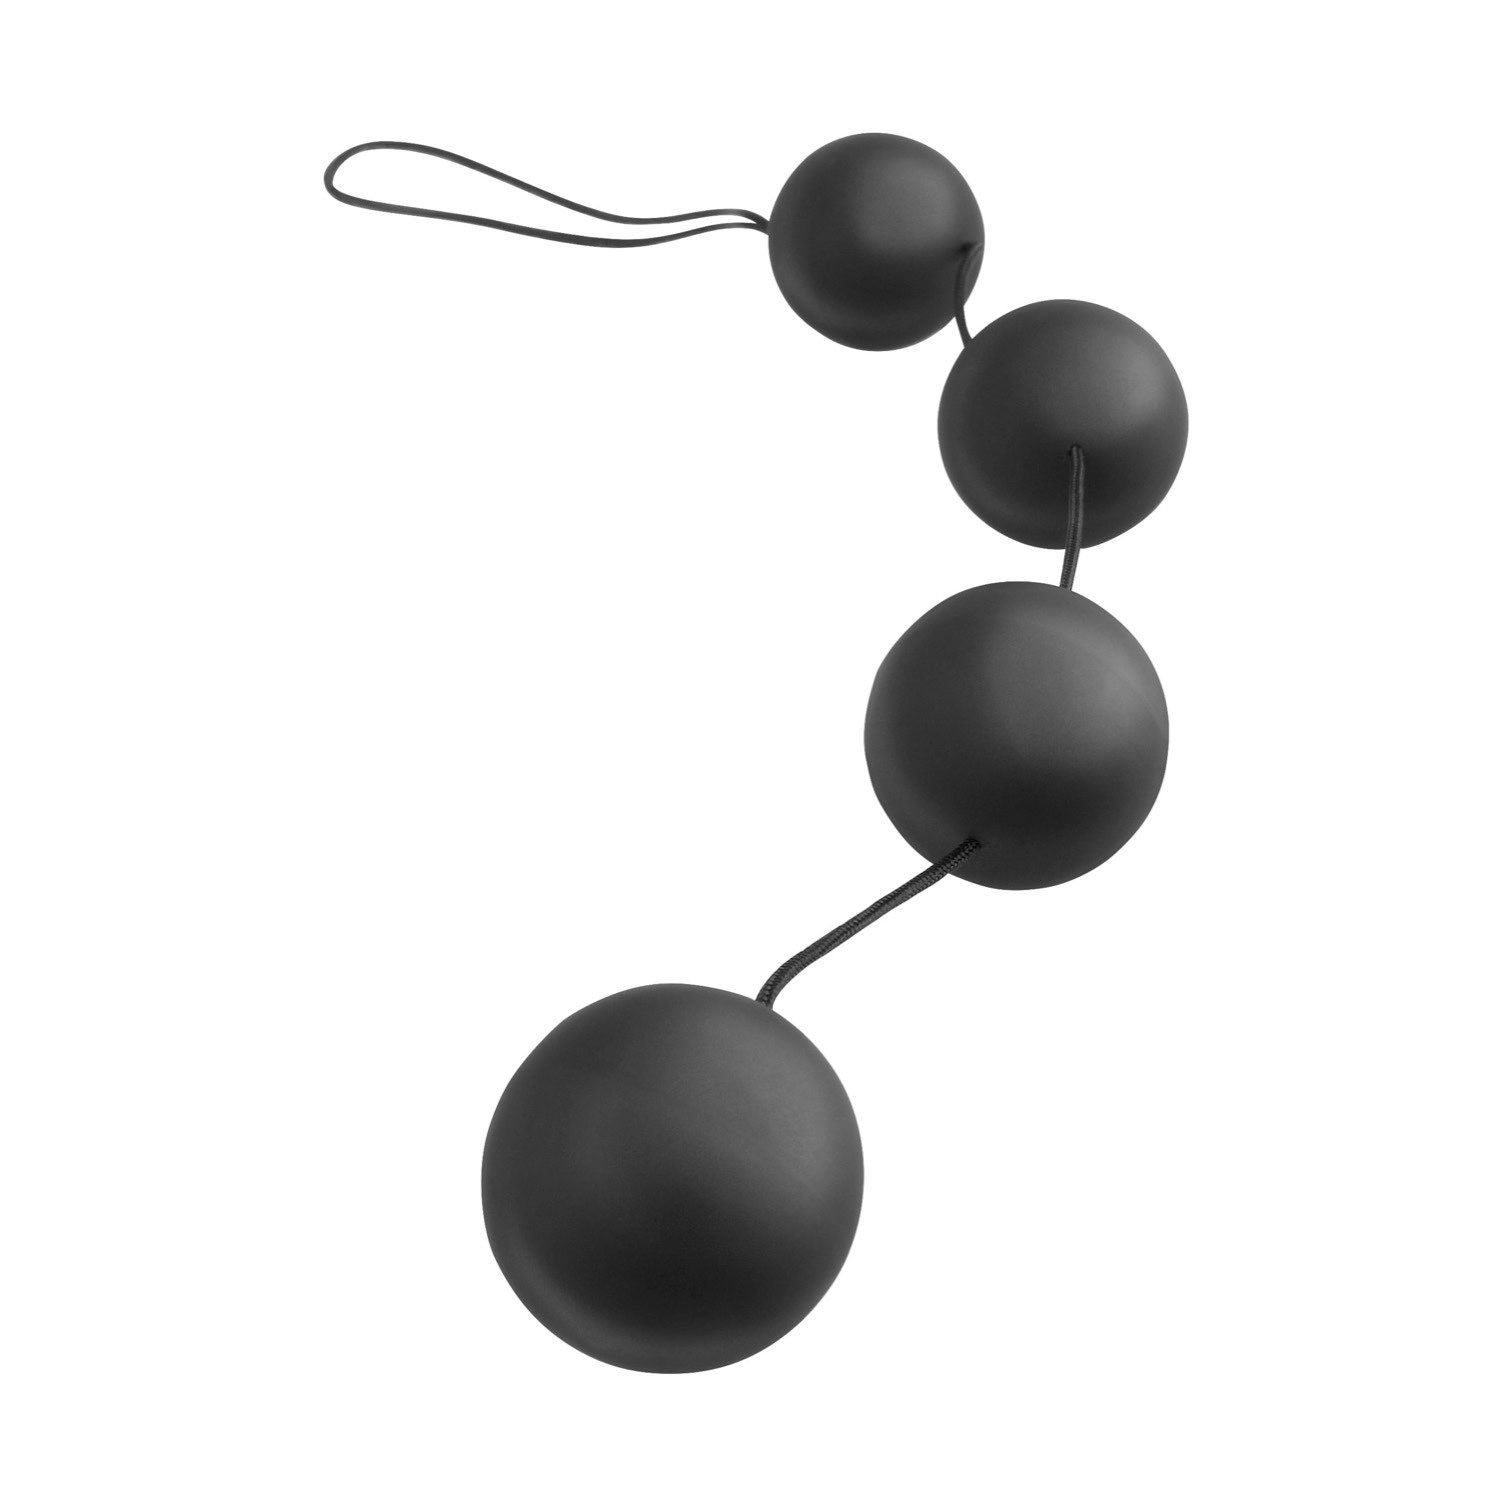 Anal Fantasy Collection Deluxe Vibro Balls - Black Anal Duo Balls by Pipedream